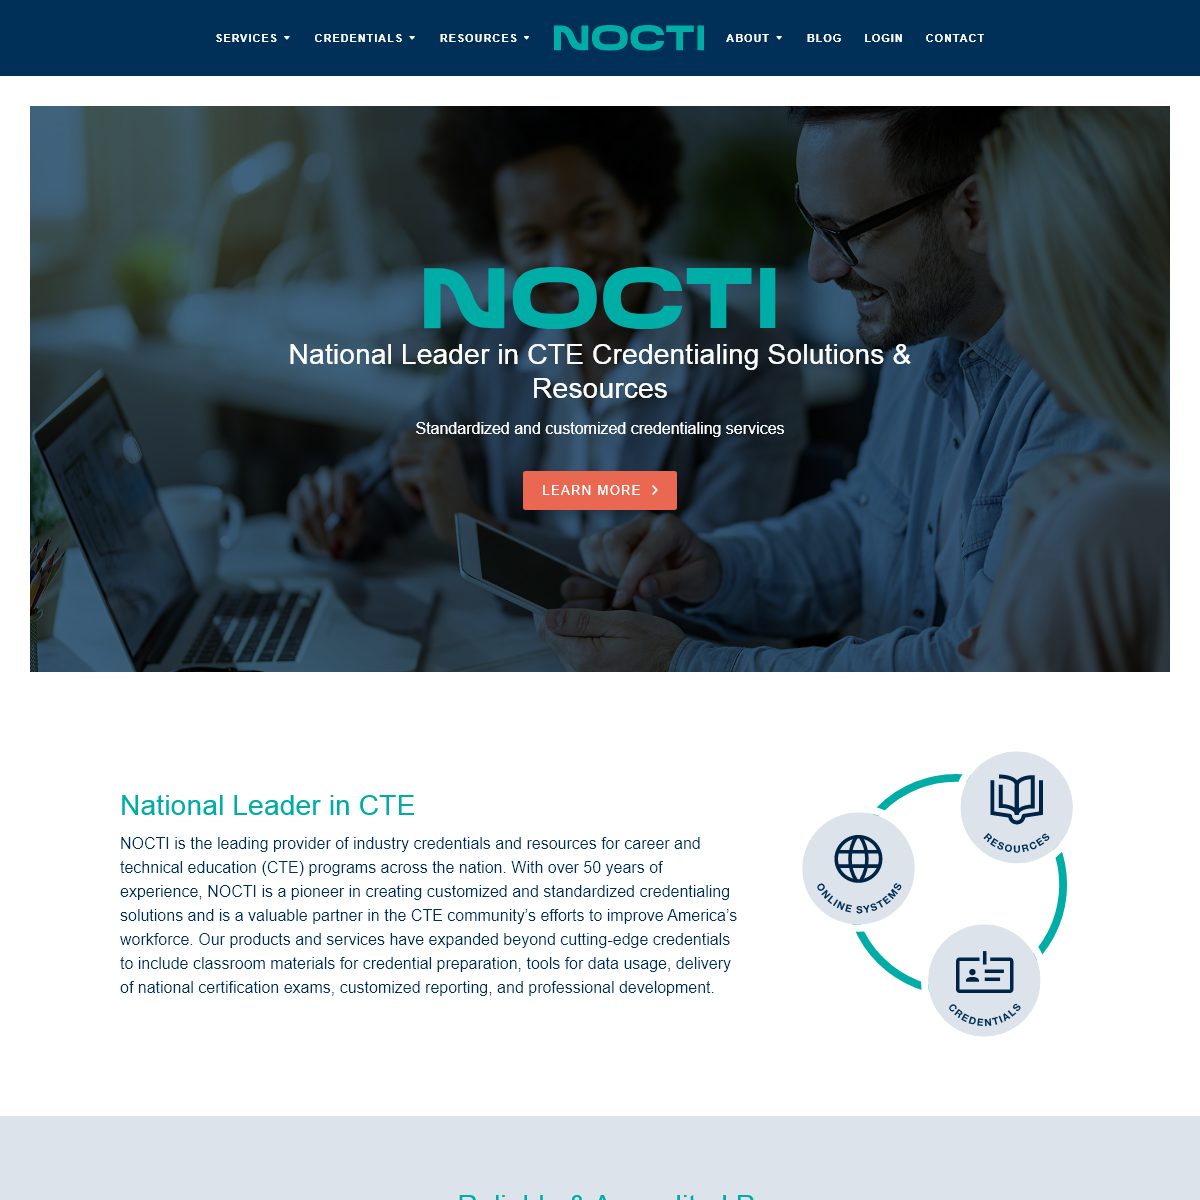 A complete backup of nocti.org